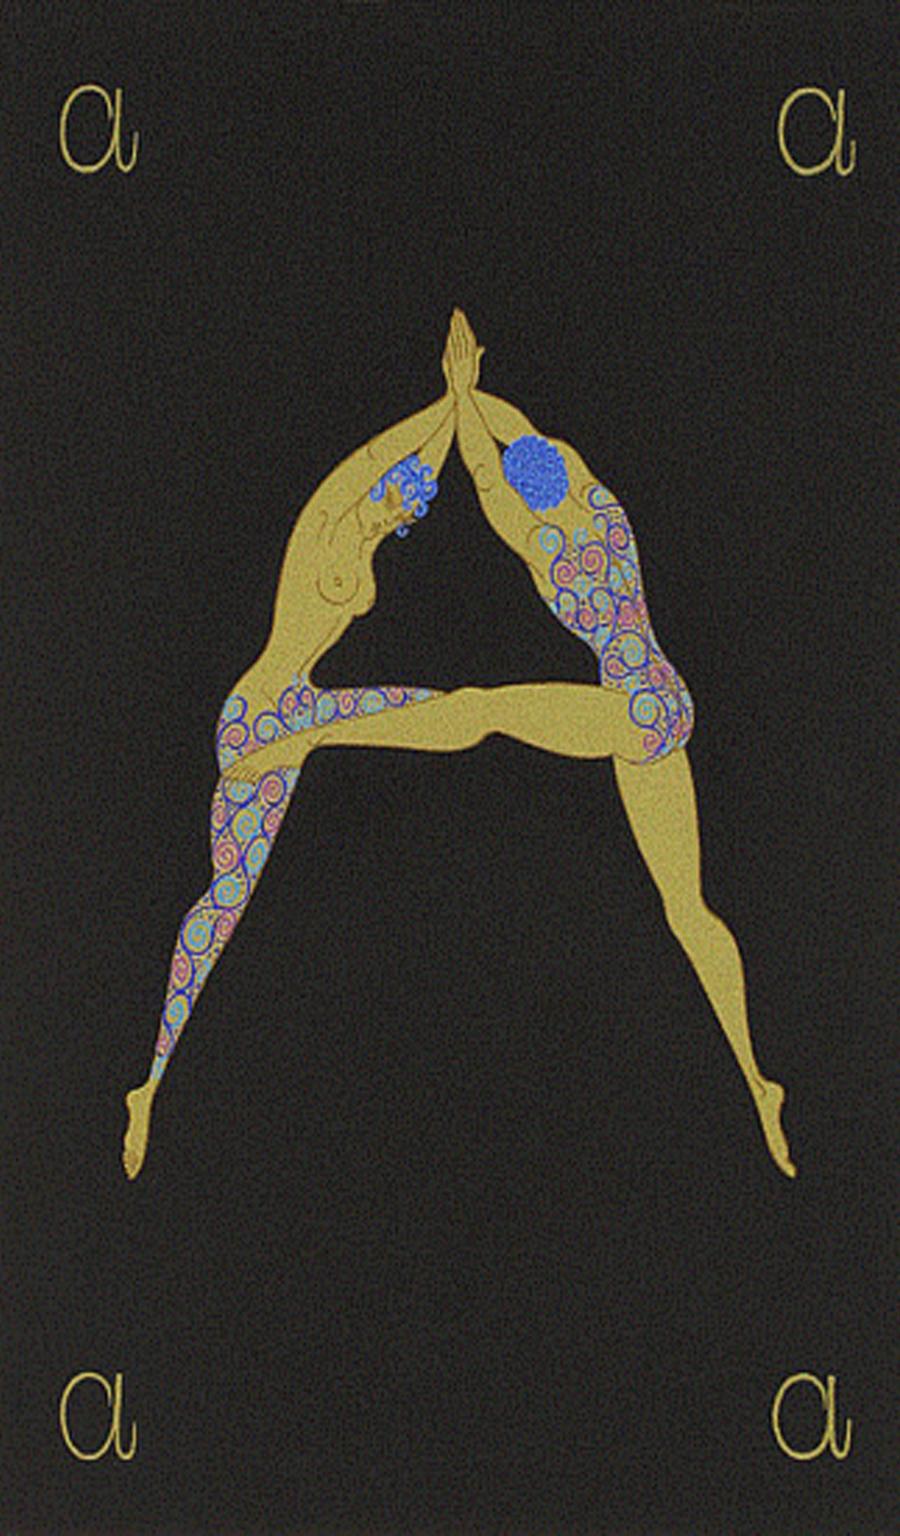 Erté Still-Life Print - ERTE SERIGRAPH, "THE ALPHABET SUITE" 26 PIC. EACH SIGNED AND NUMBERED